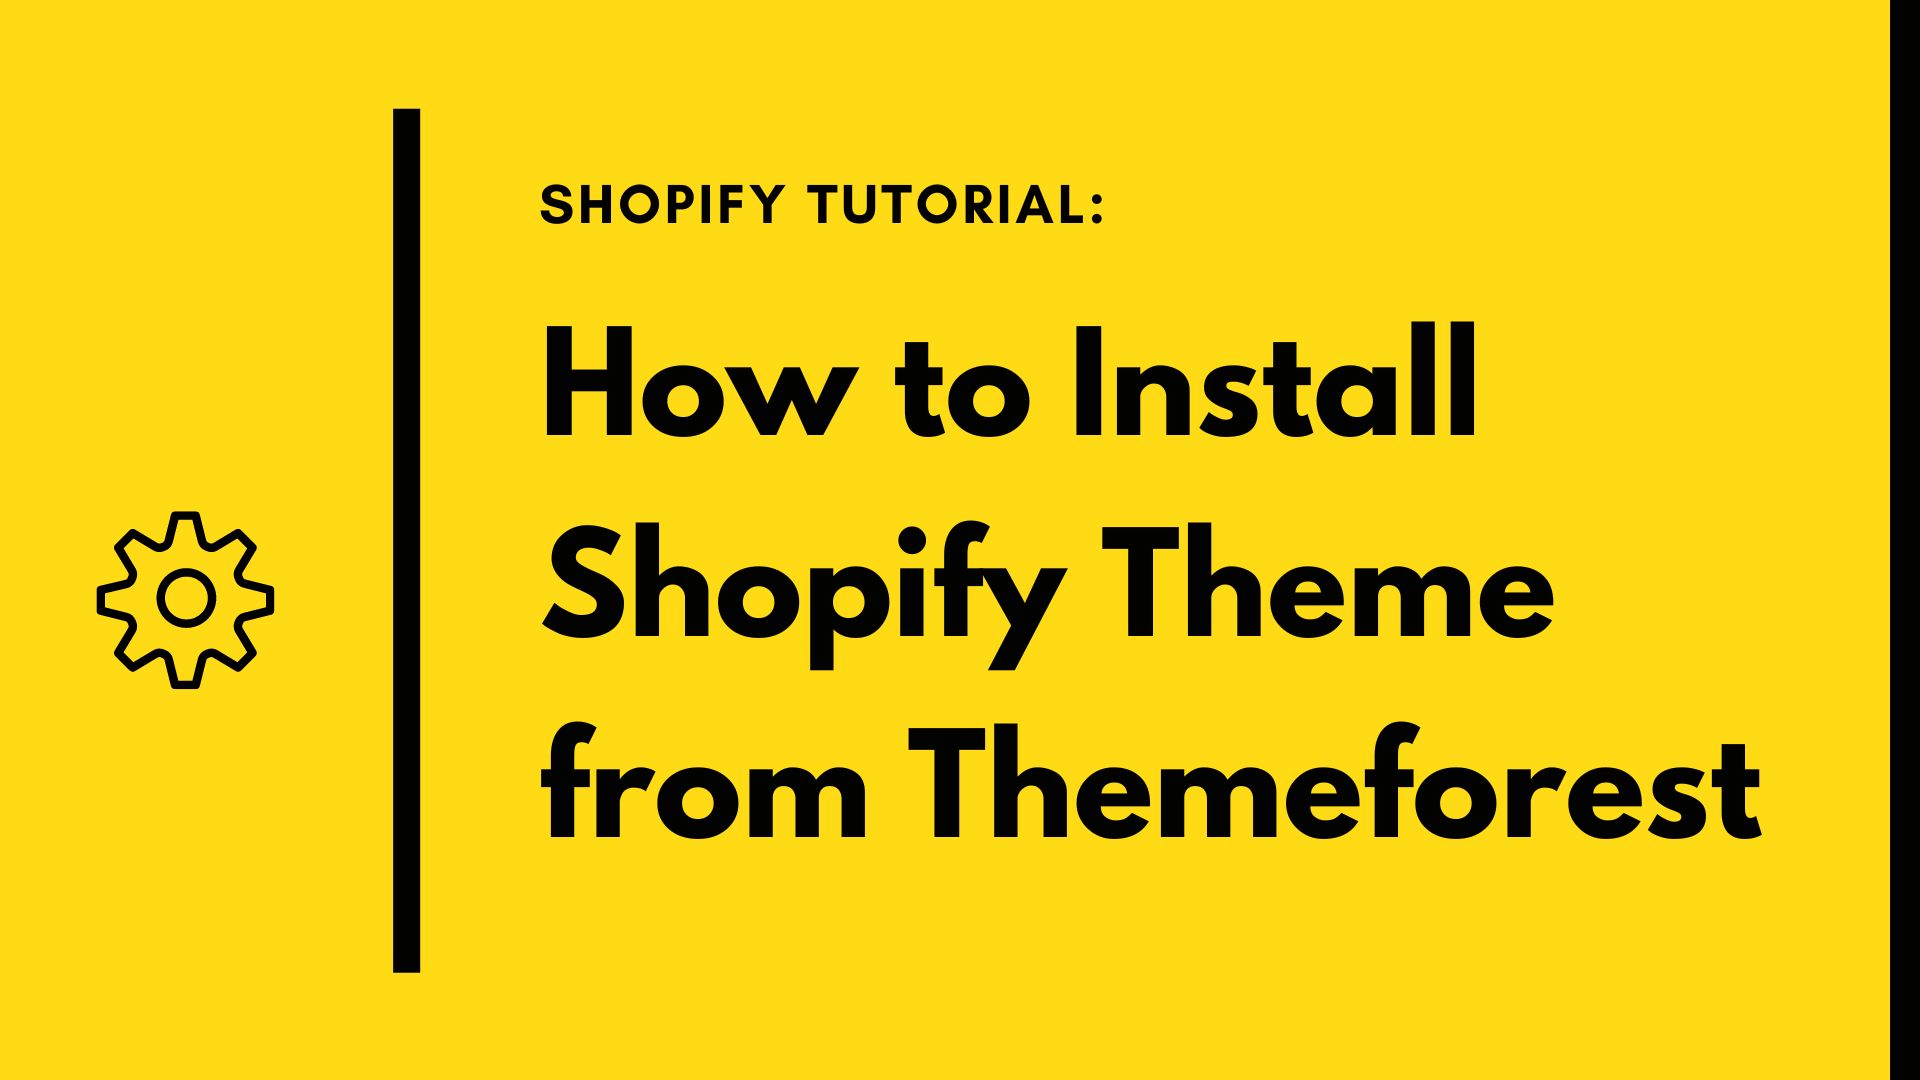 how-to-install-shopify-theme-from-themeforest